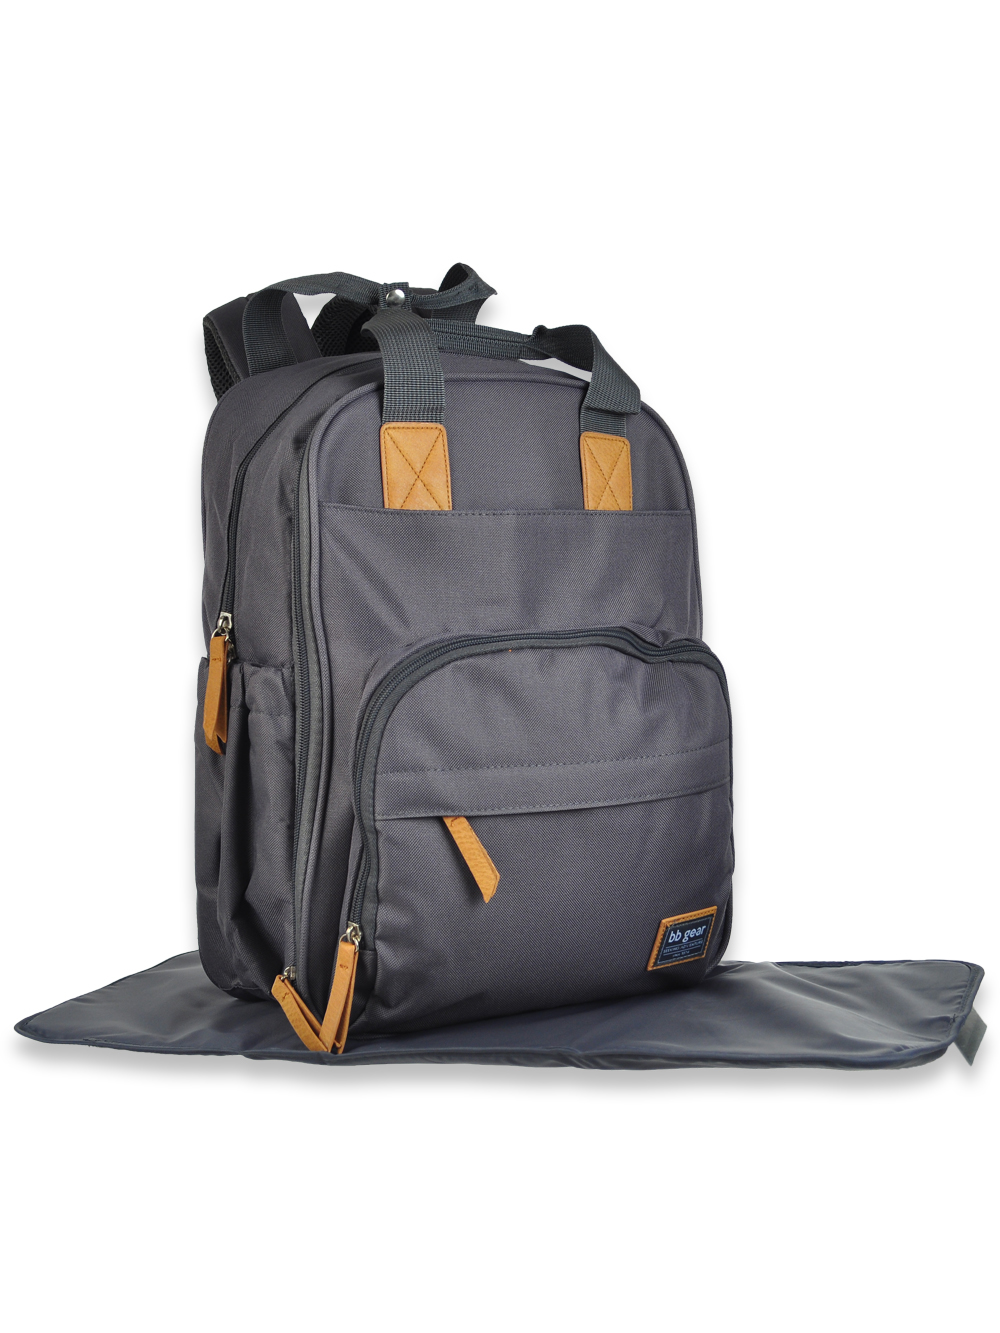 bb backpack review